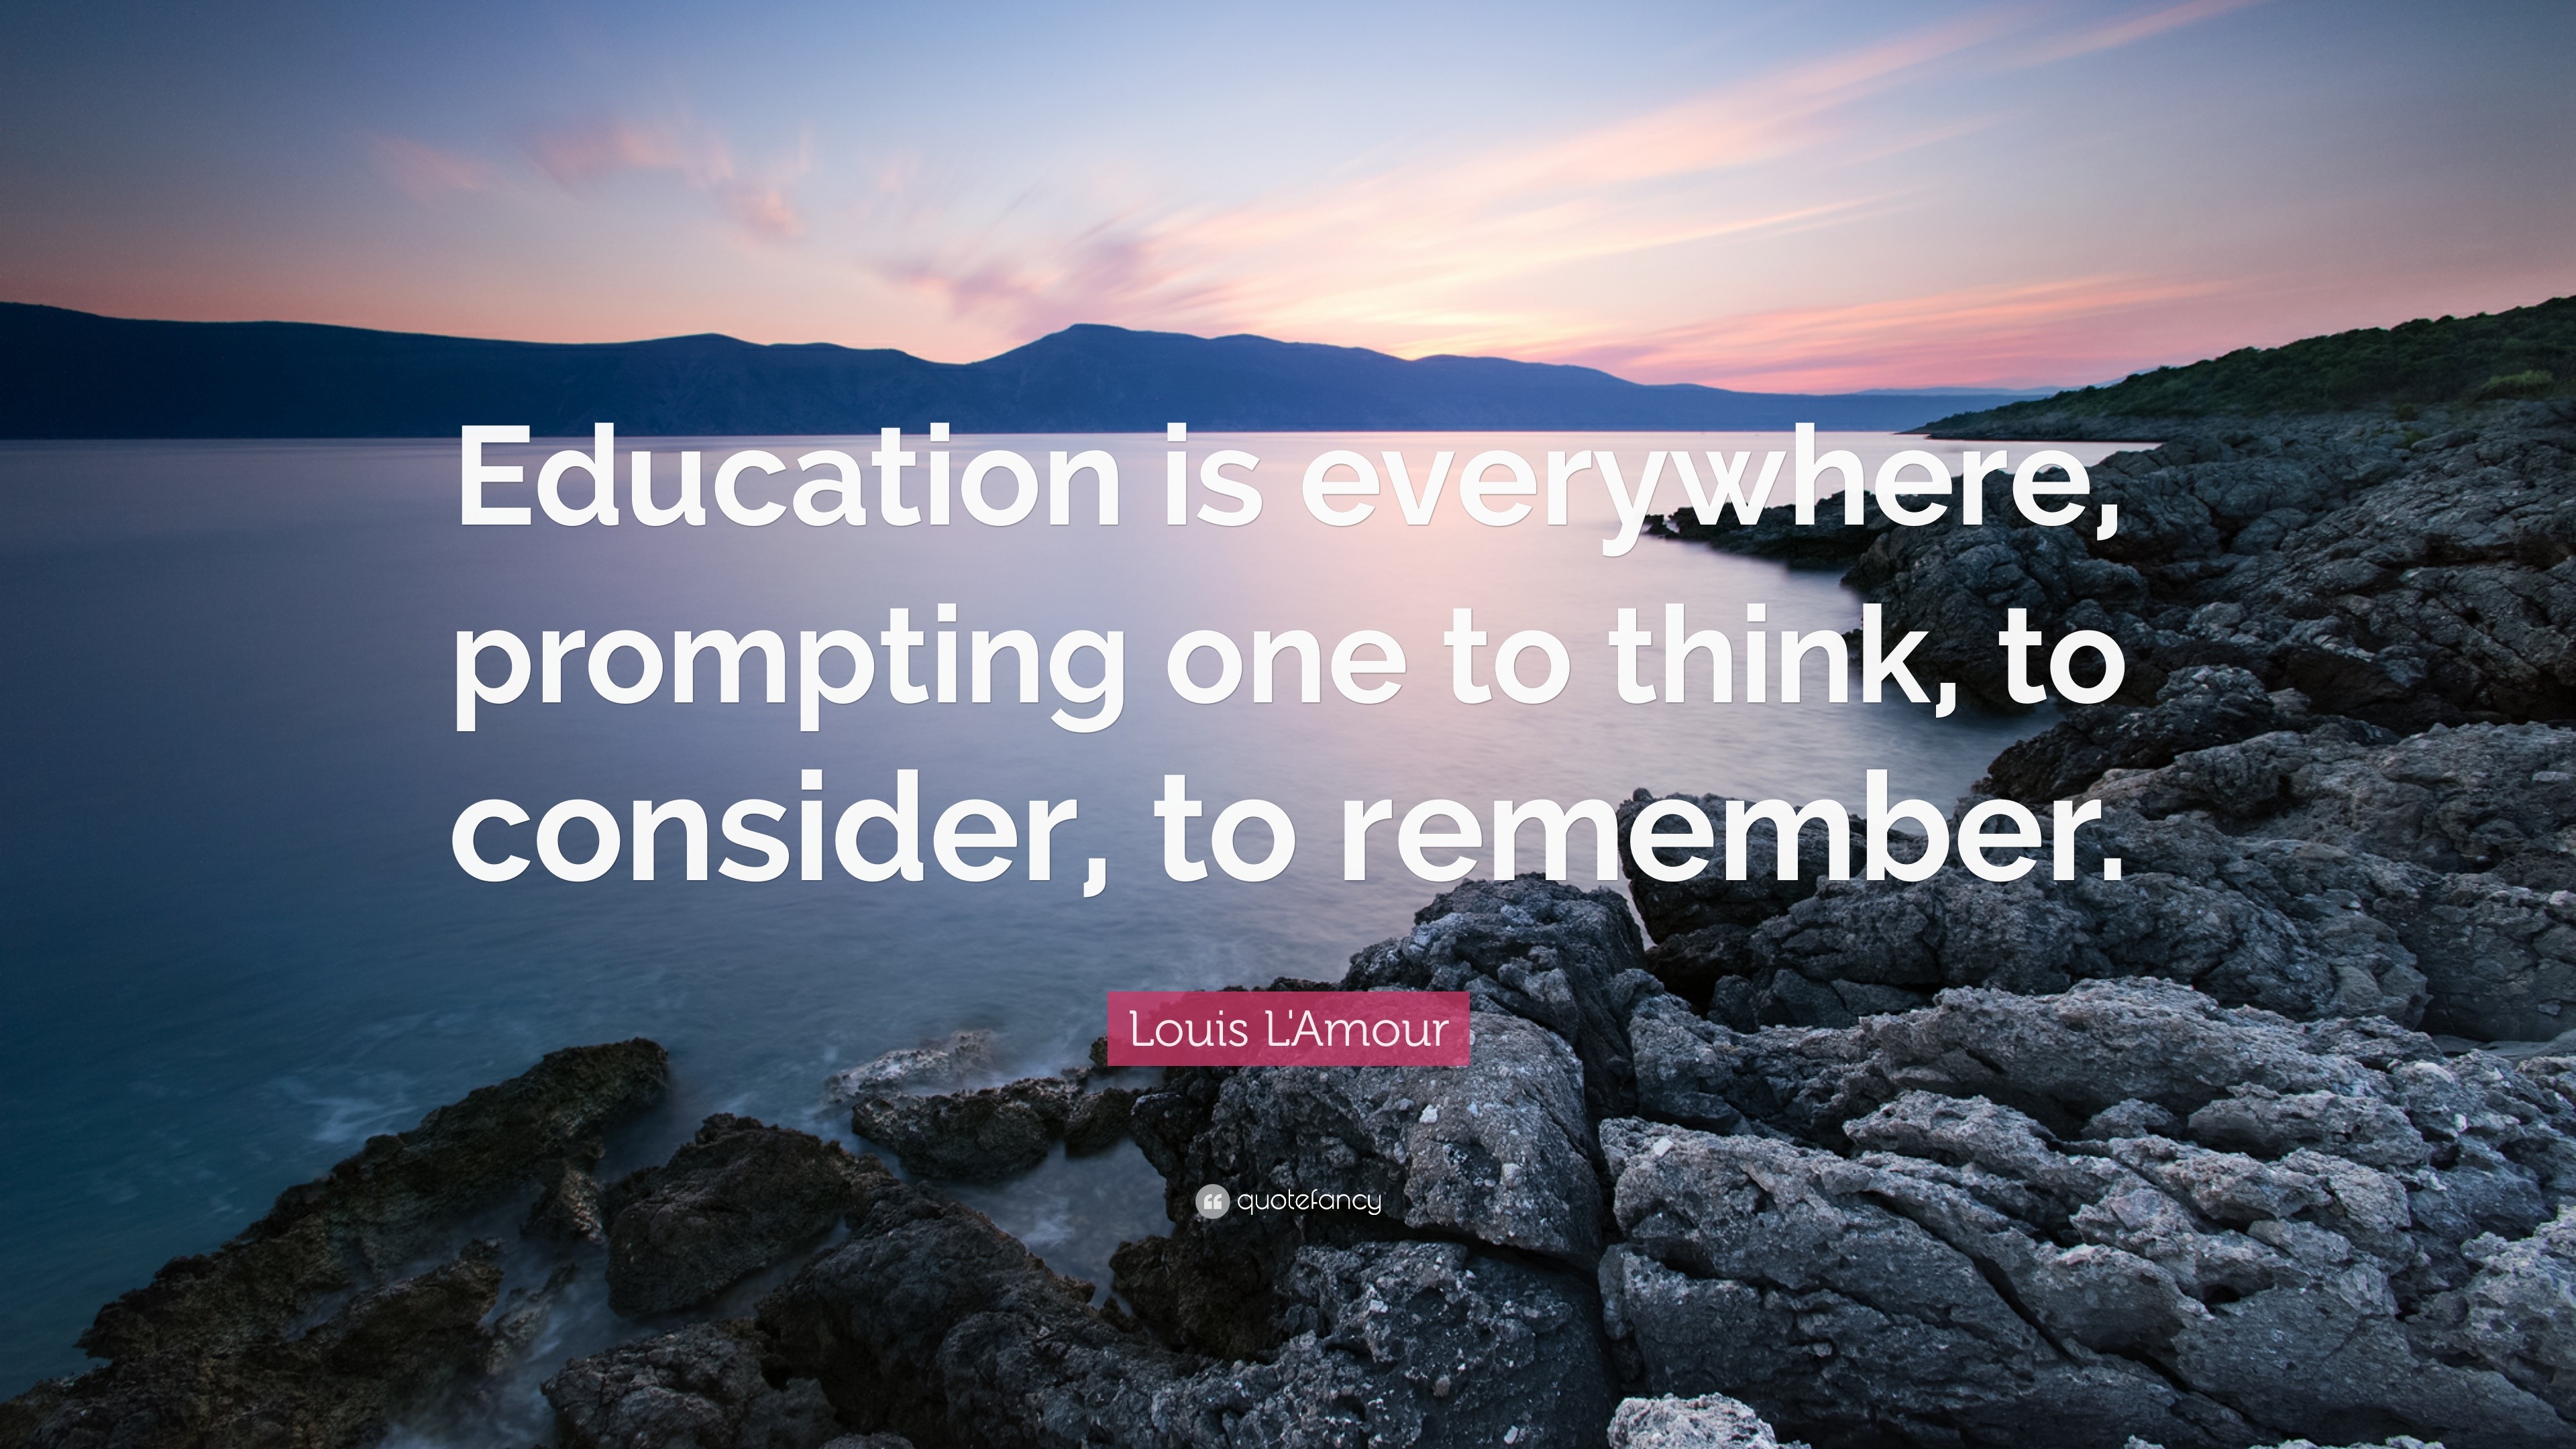 Louis L&#39;Amour Quote: “Education is everywhere, prompting one to think, to consider, to remember ...